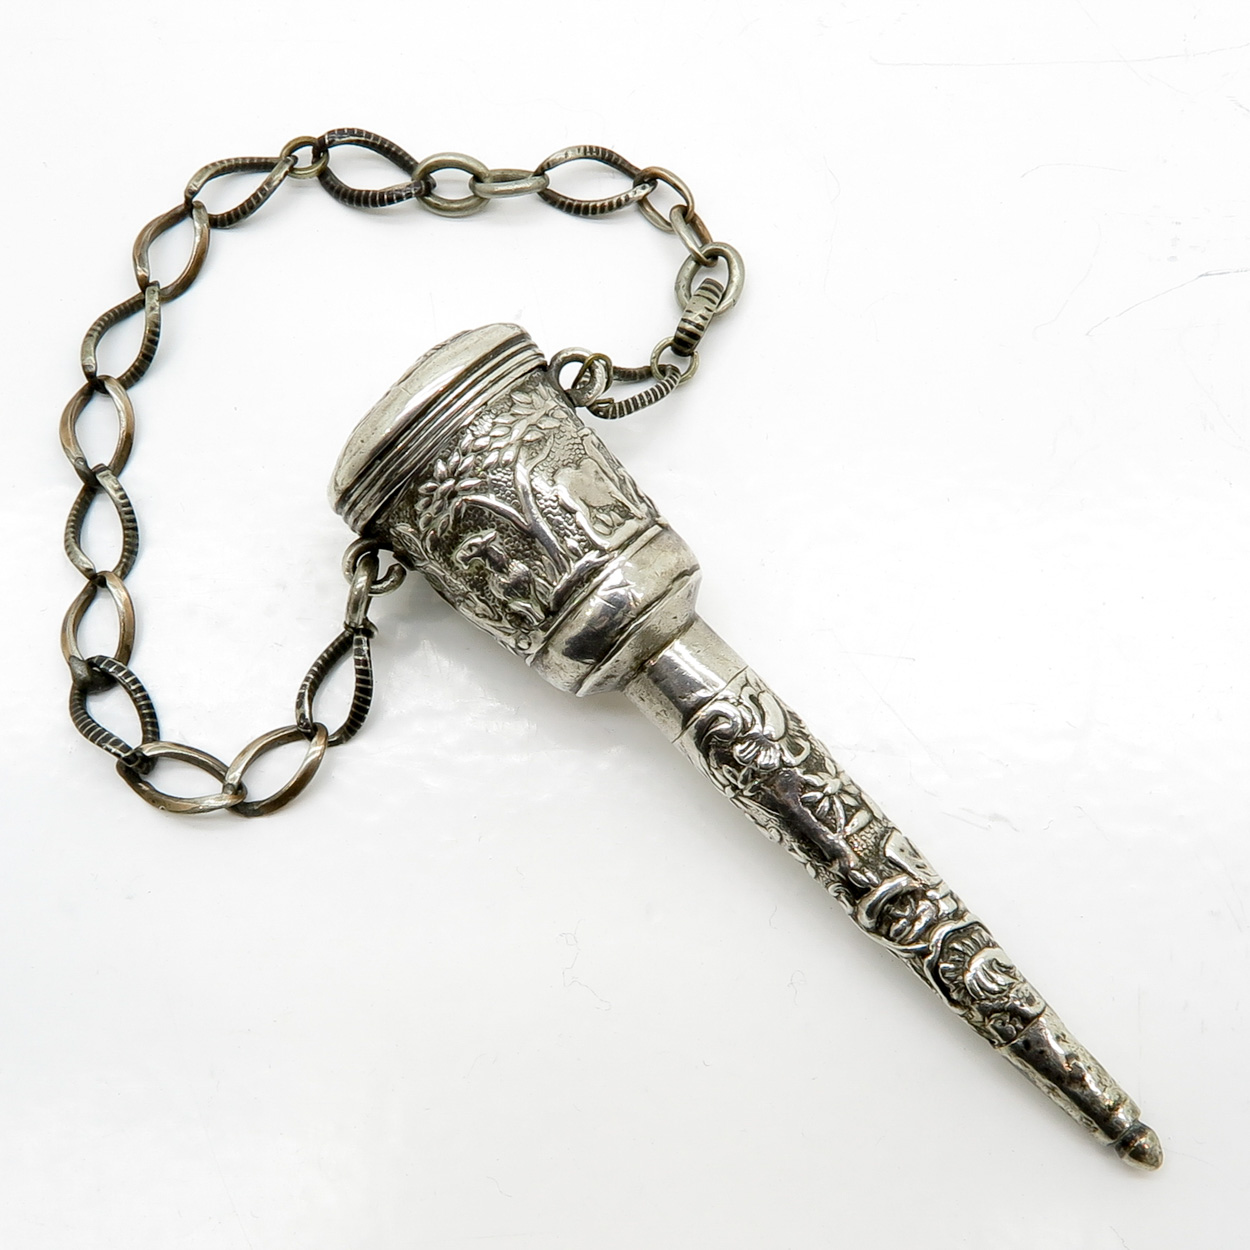 Silver Chain for Thimble and Knitting Needles